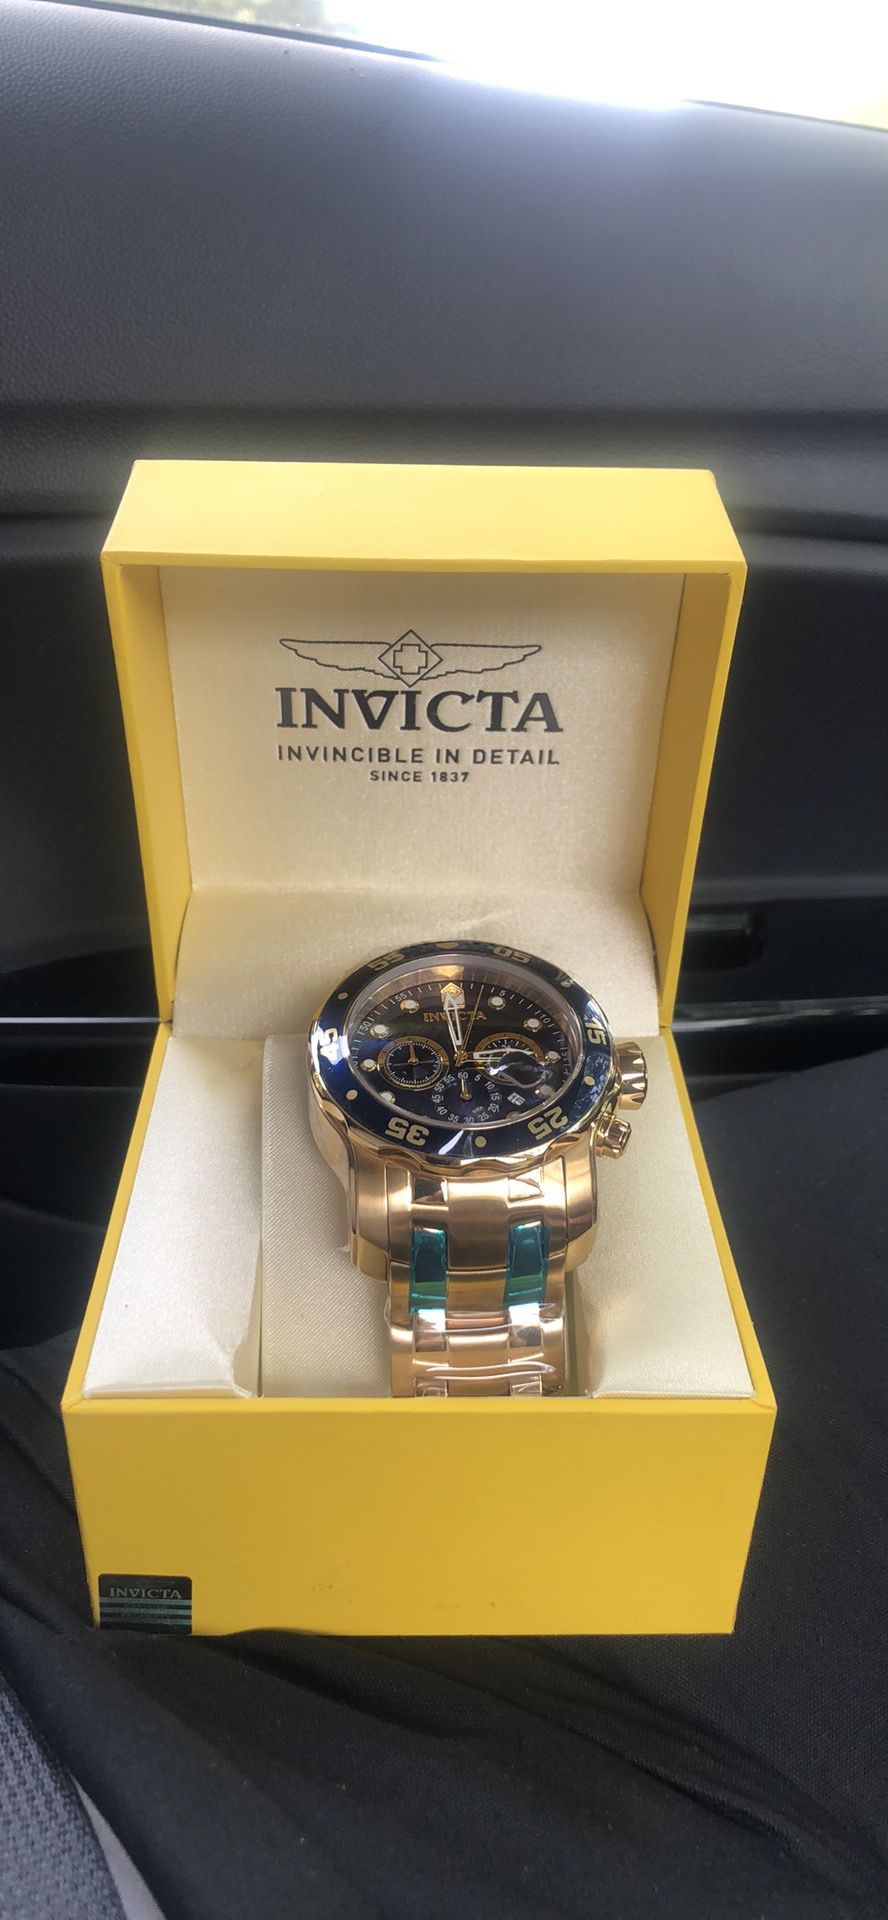 INVICTA BLUEFACE PRO DIVER SERIES WATCH! HOT DEAL!